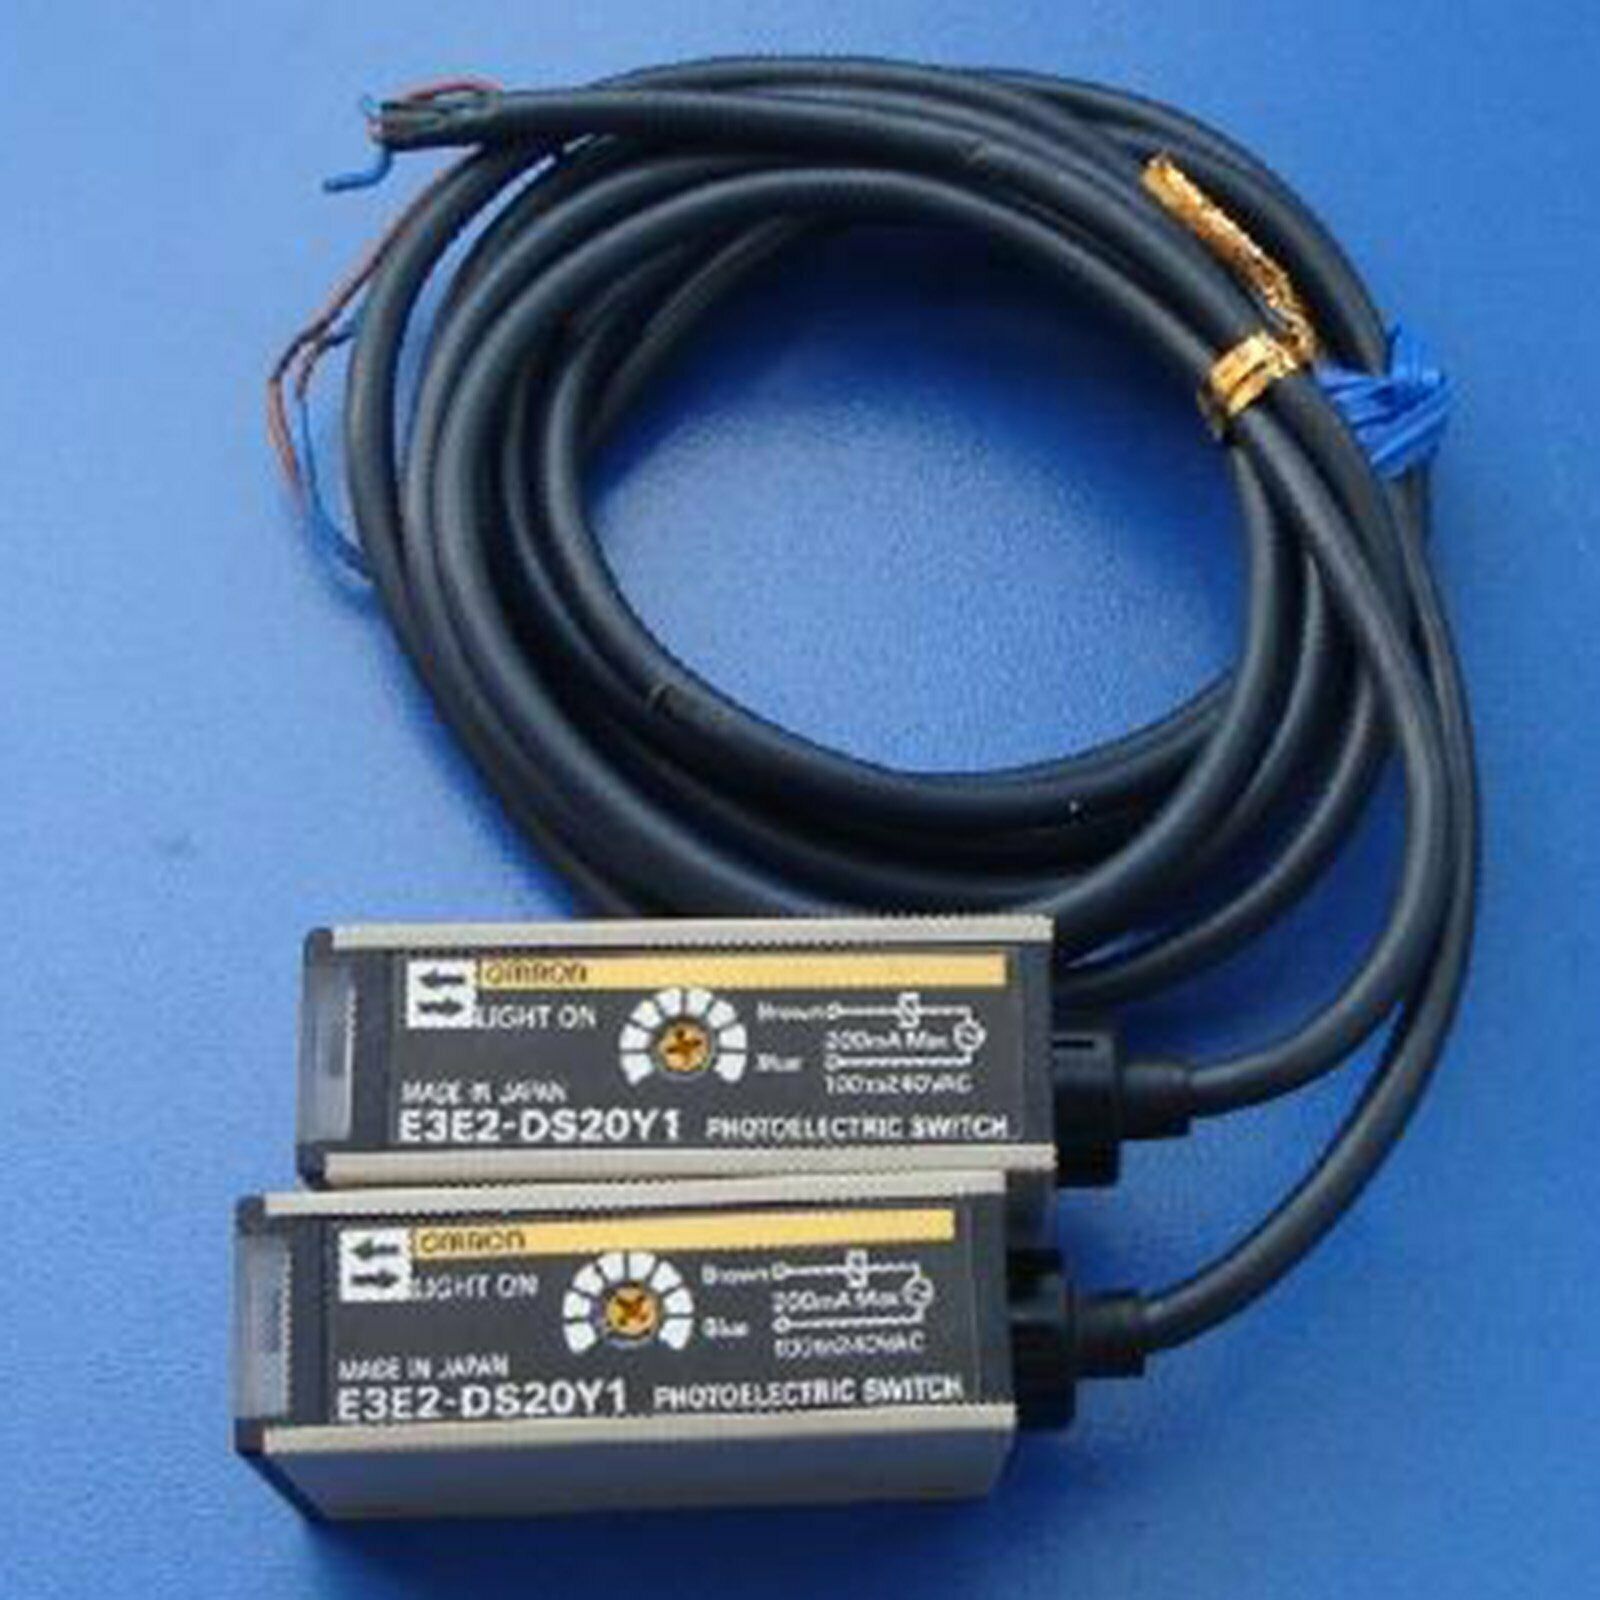 E3E2-DS20Y1 KOEED 101-200, import_2020_10_10_031751, NEW, OMRON, Other